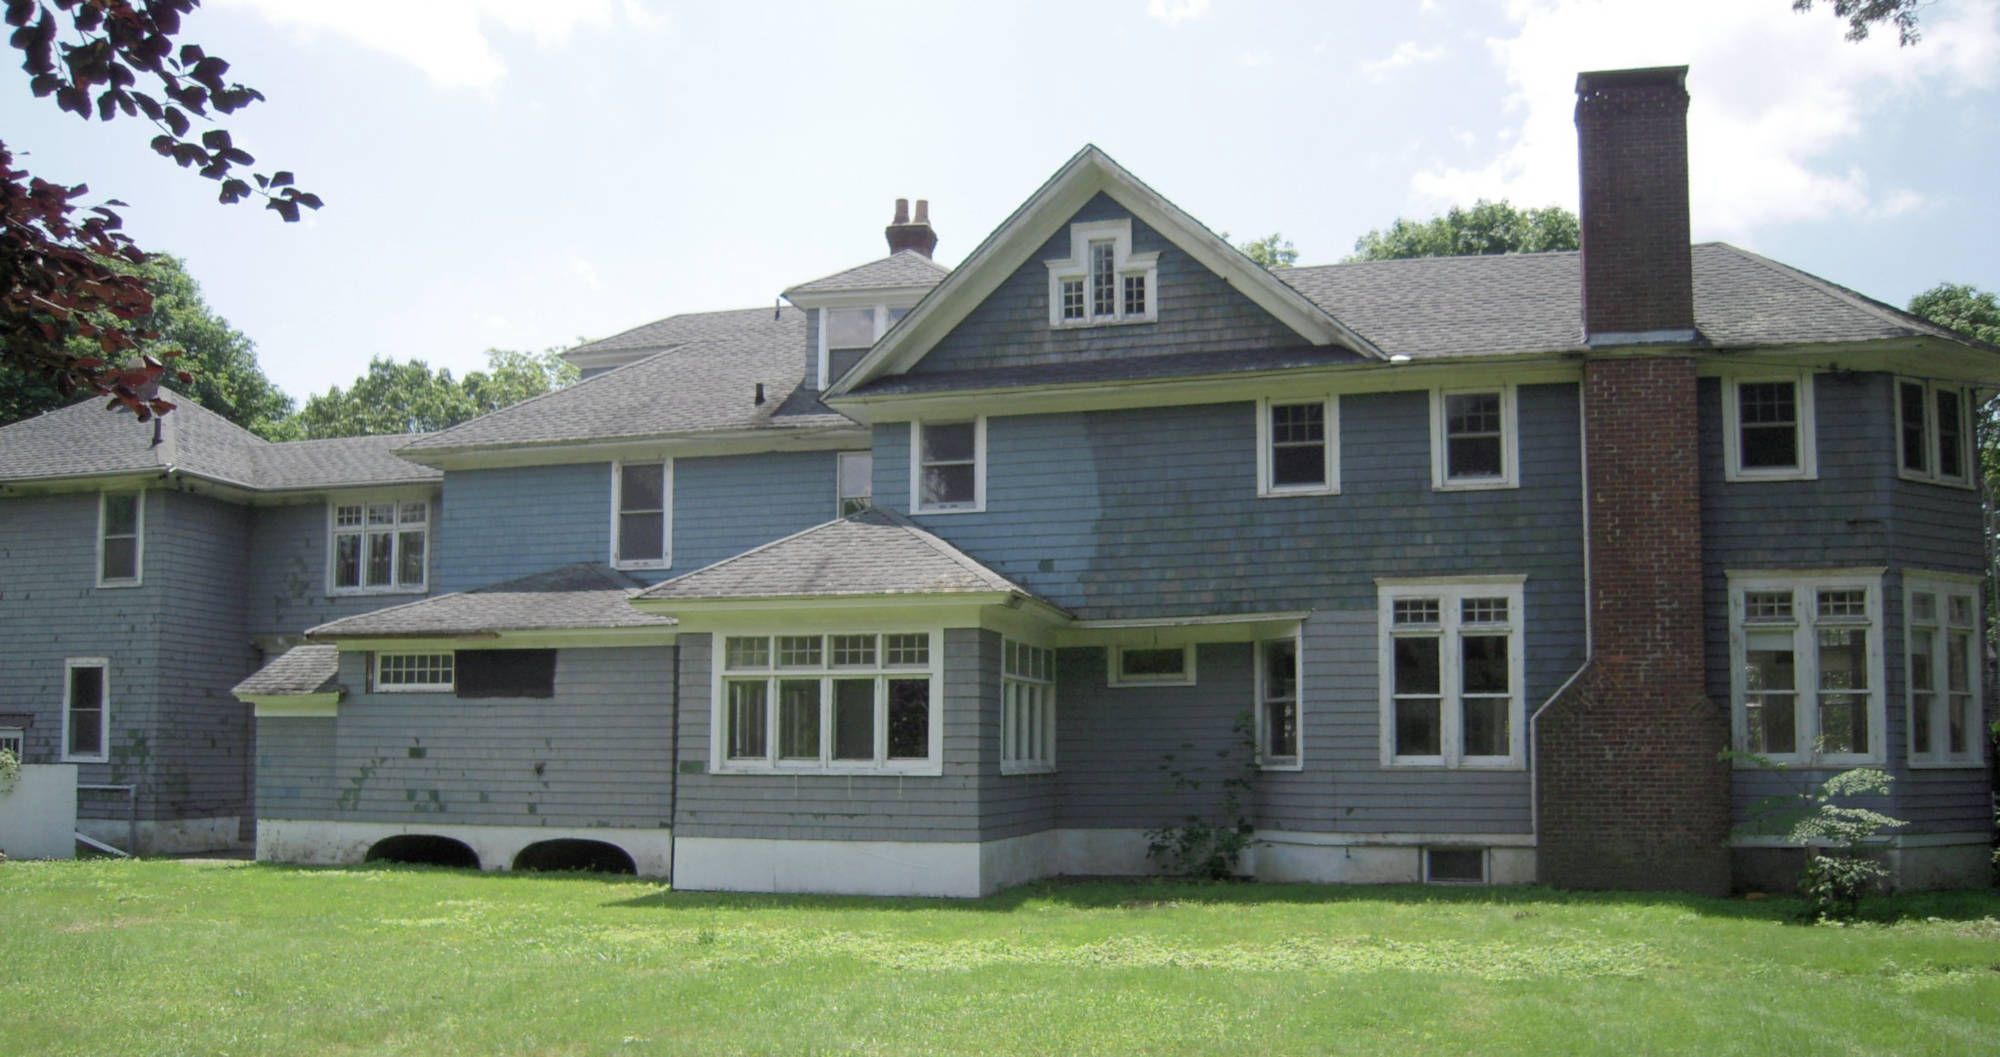 shingle style before after